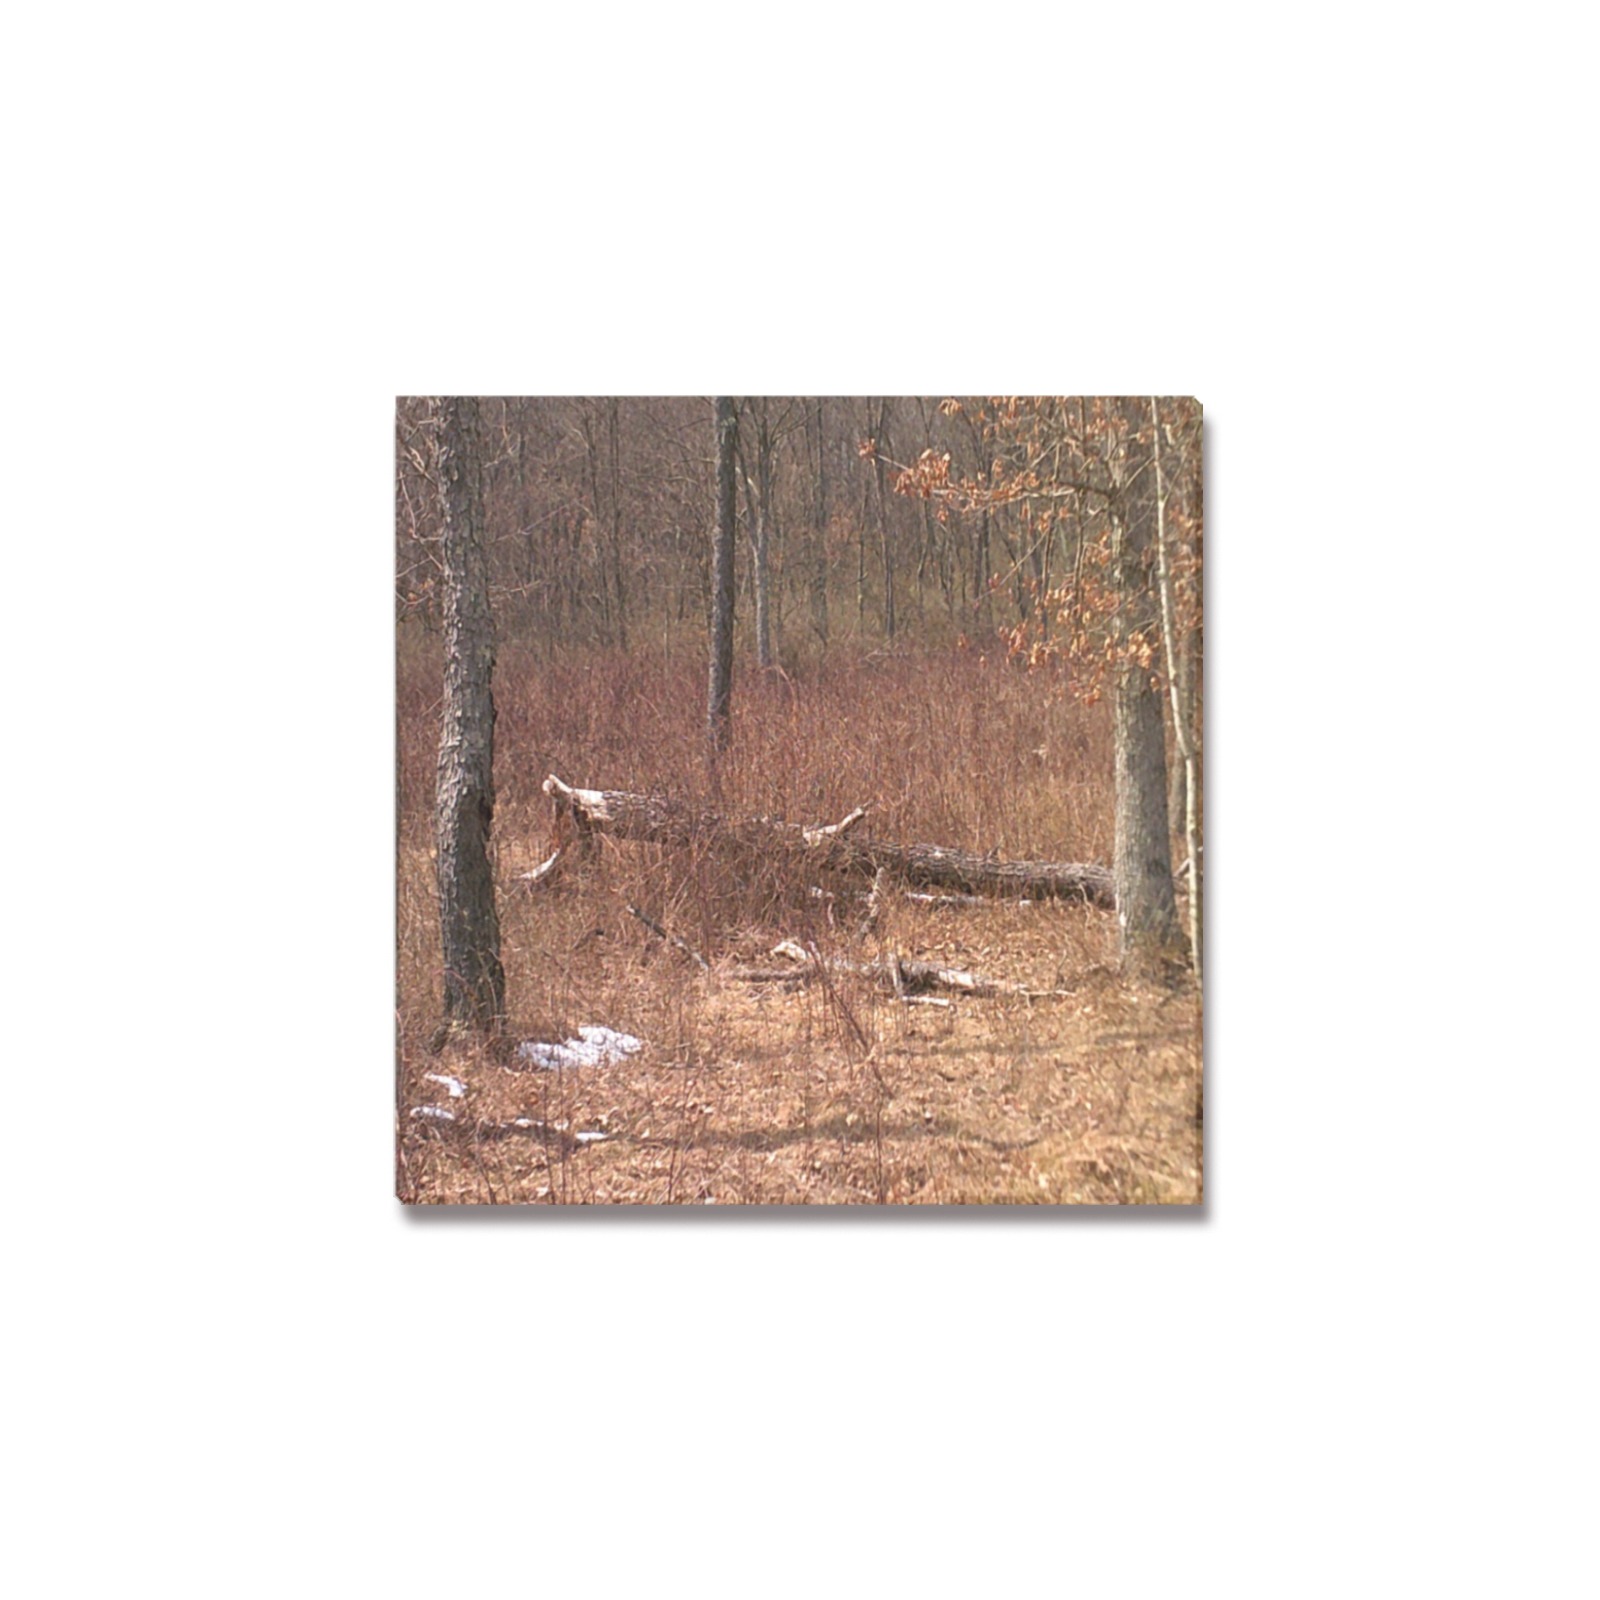 Falling tree in the woods Upgraded Canvas Print 12"x12"